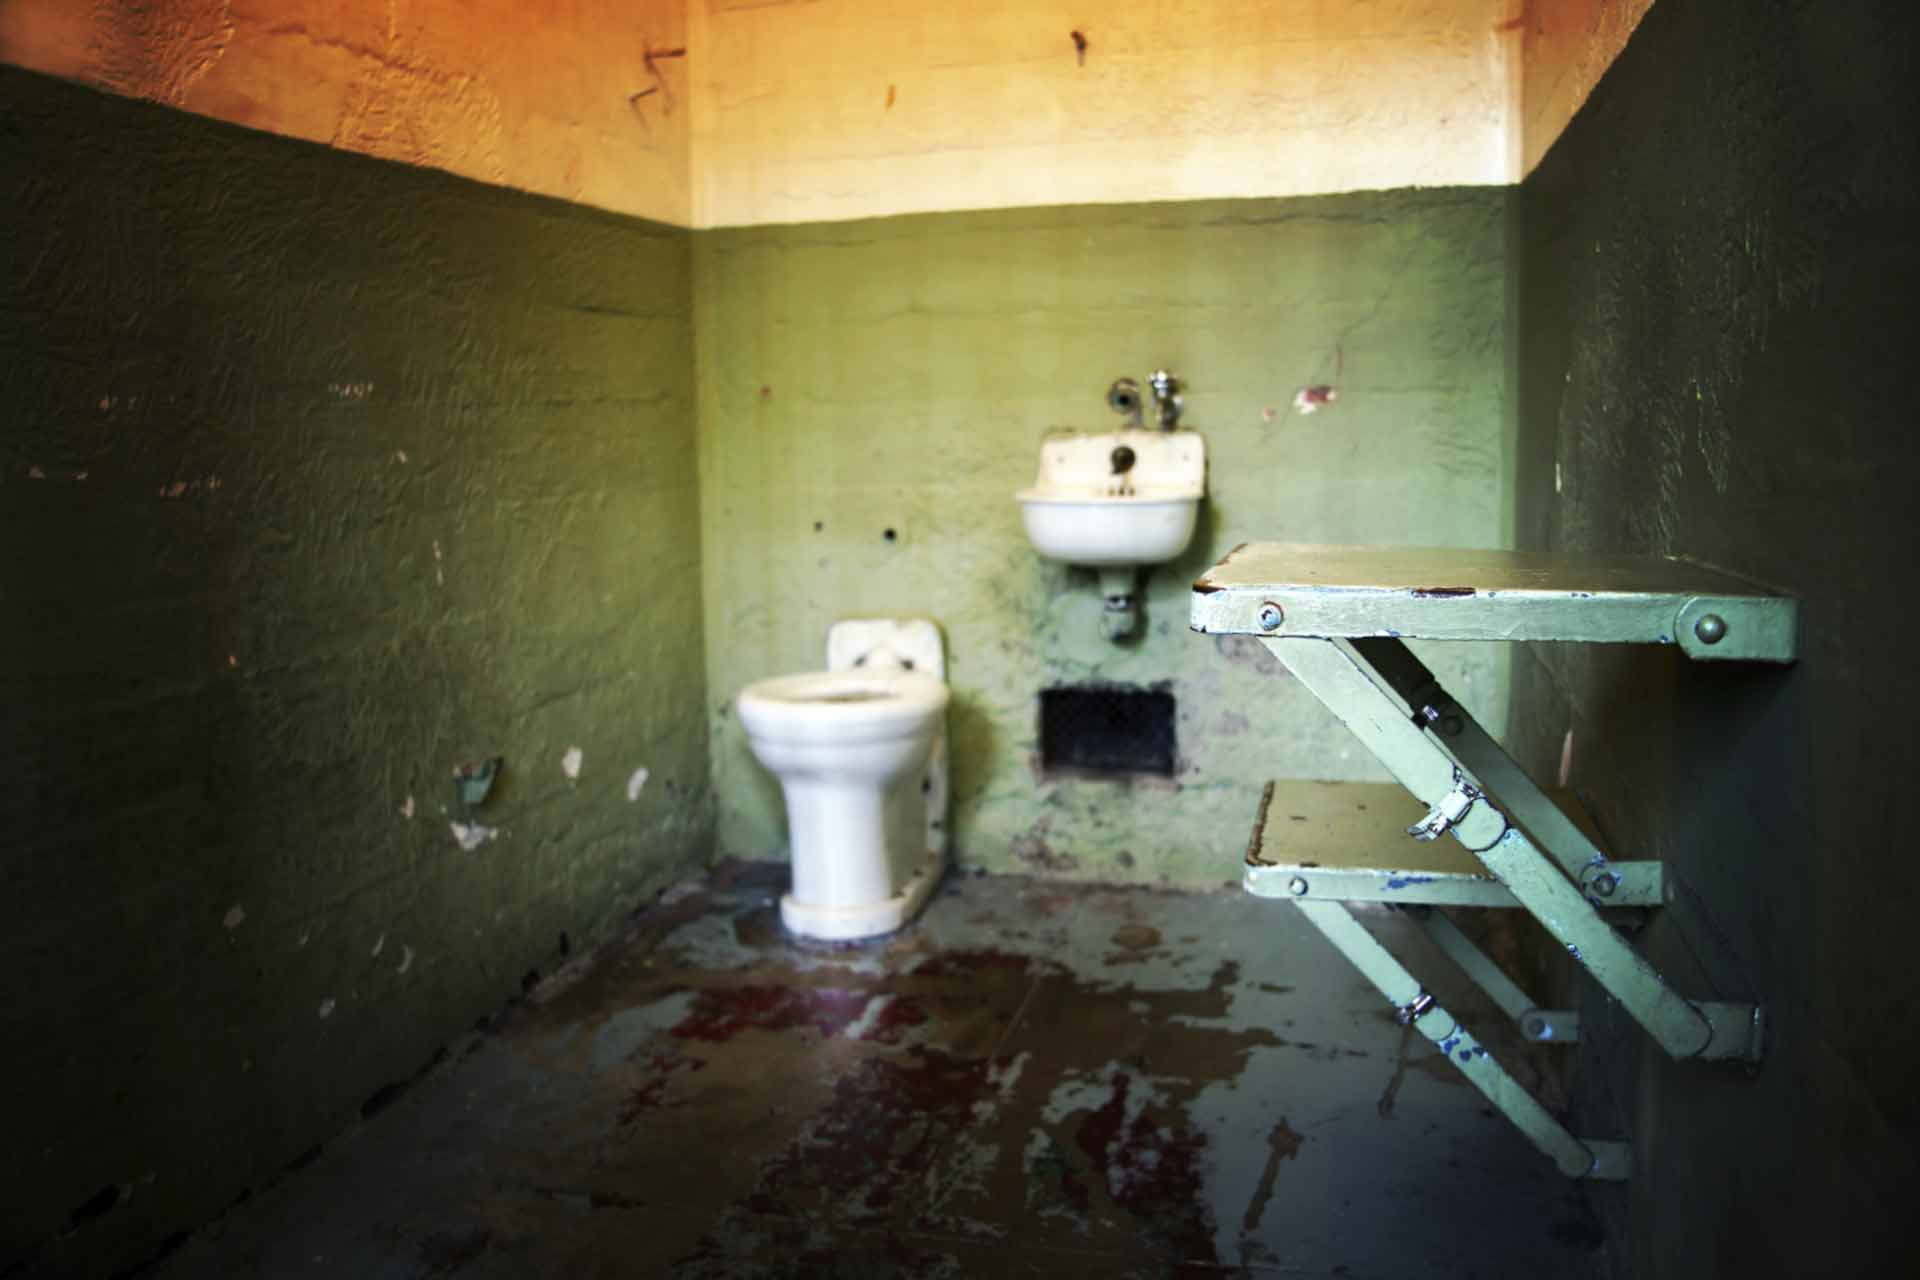 A Typical Cell on Alcatraz Island